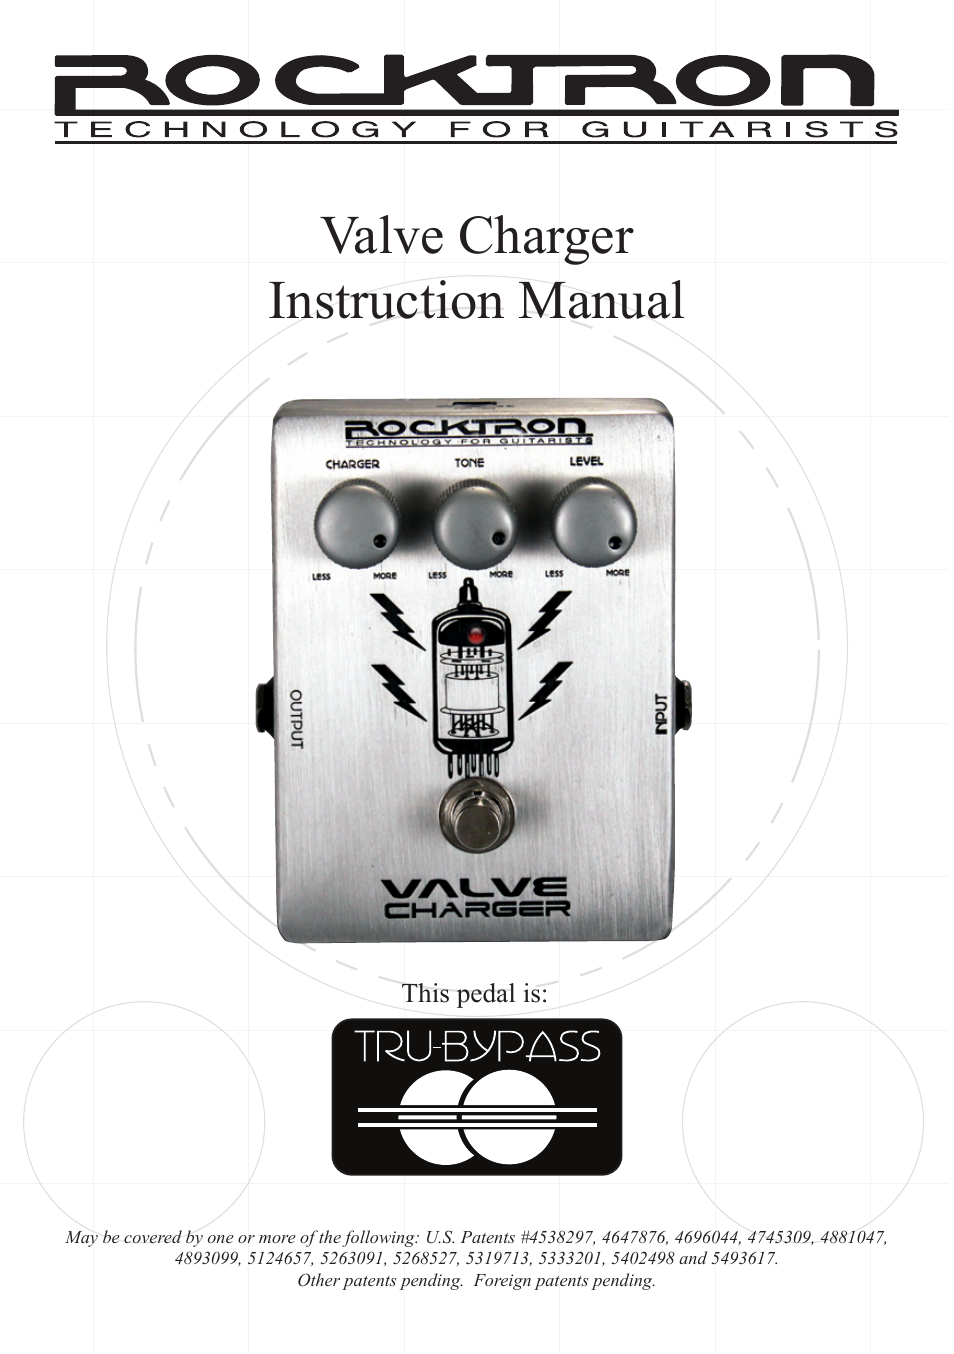 Valve Charger